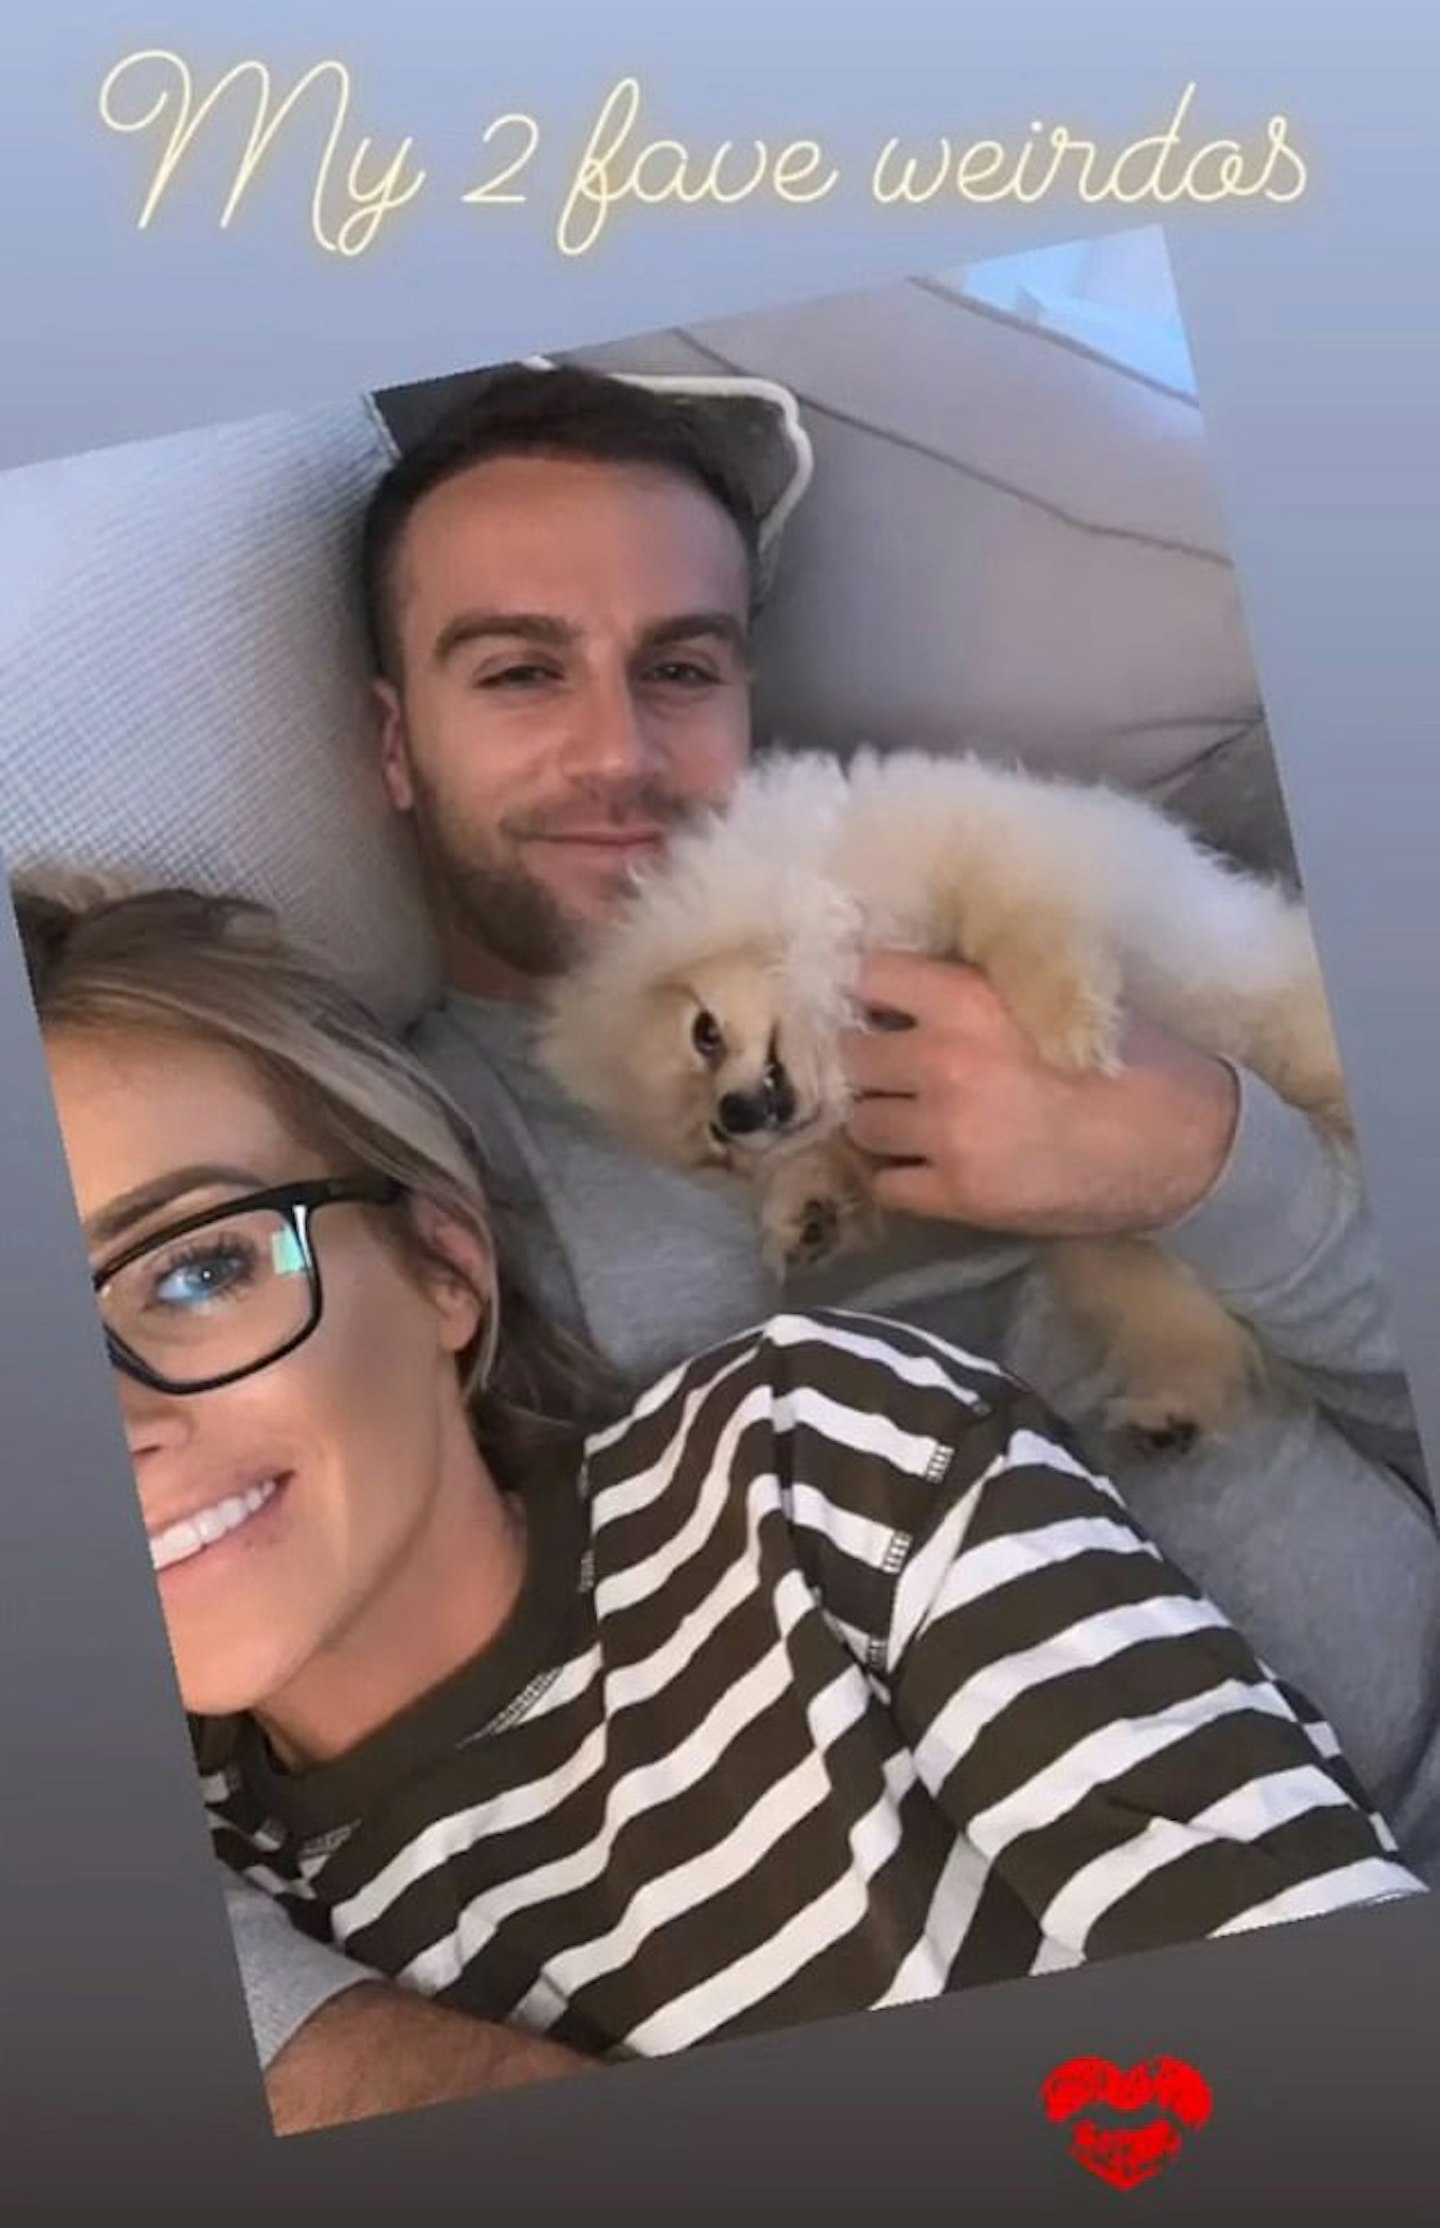 Laura seemed to hint she was back together with Max Morley